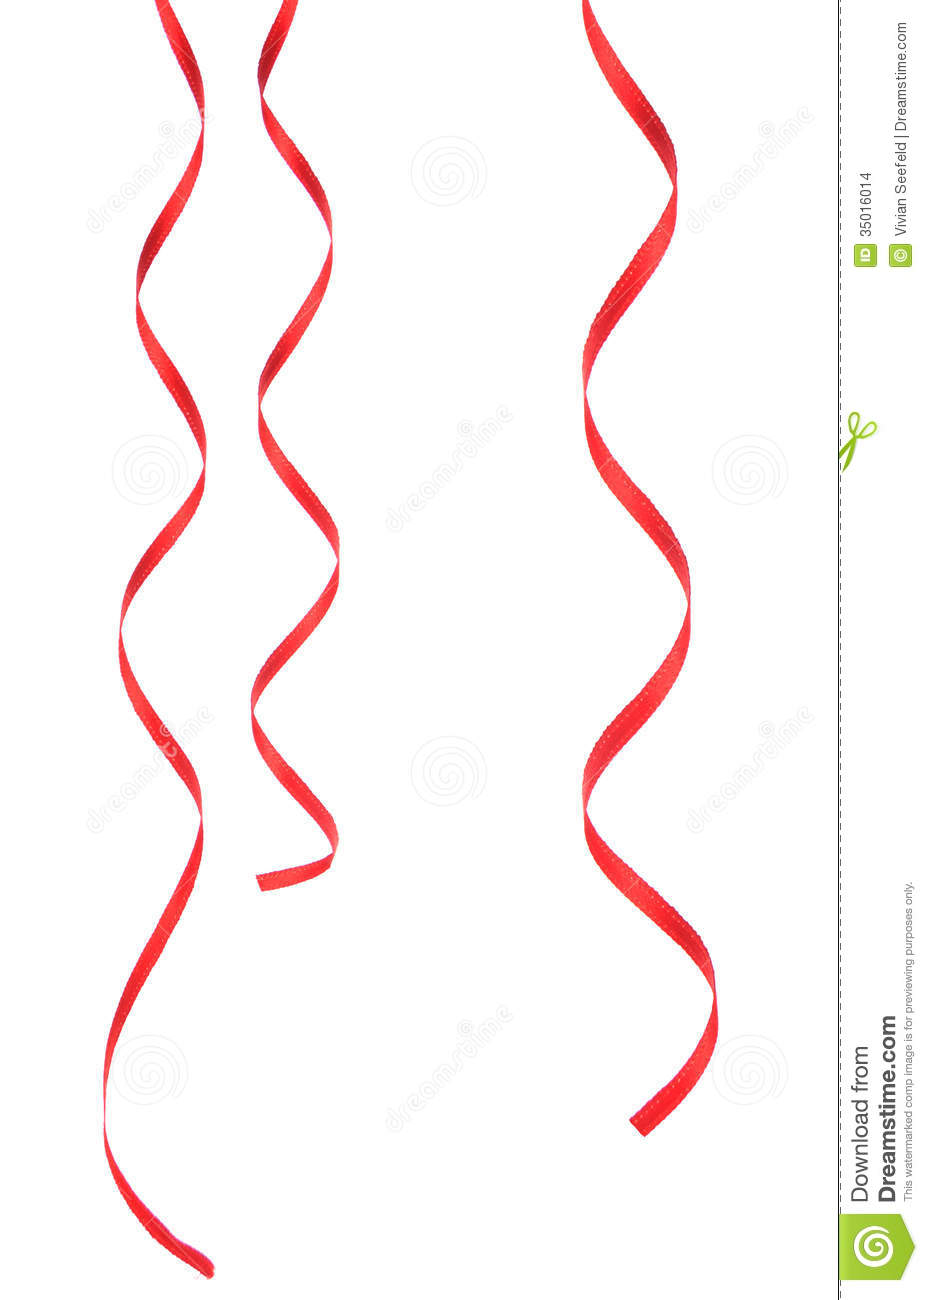 Curling Ribbons Hanging Isolated On White Background